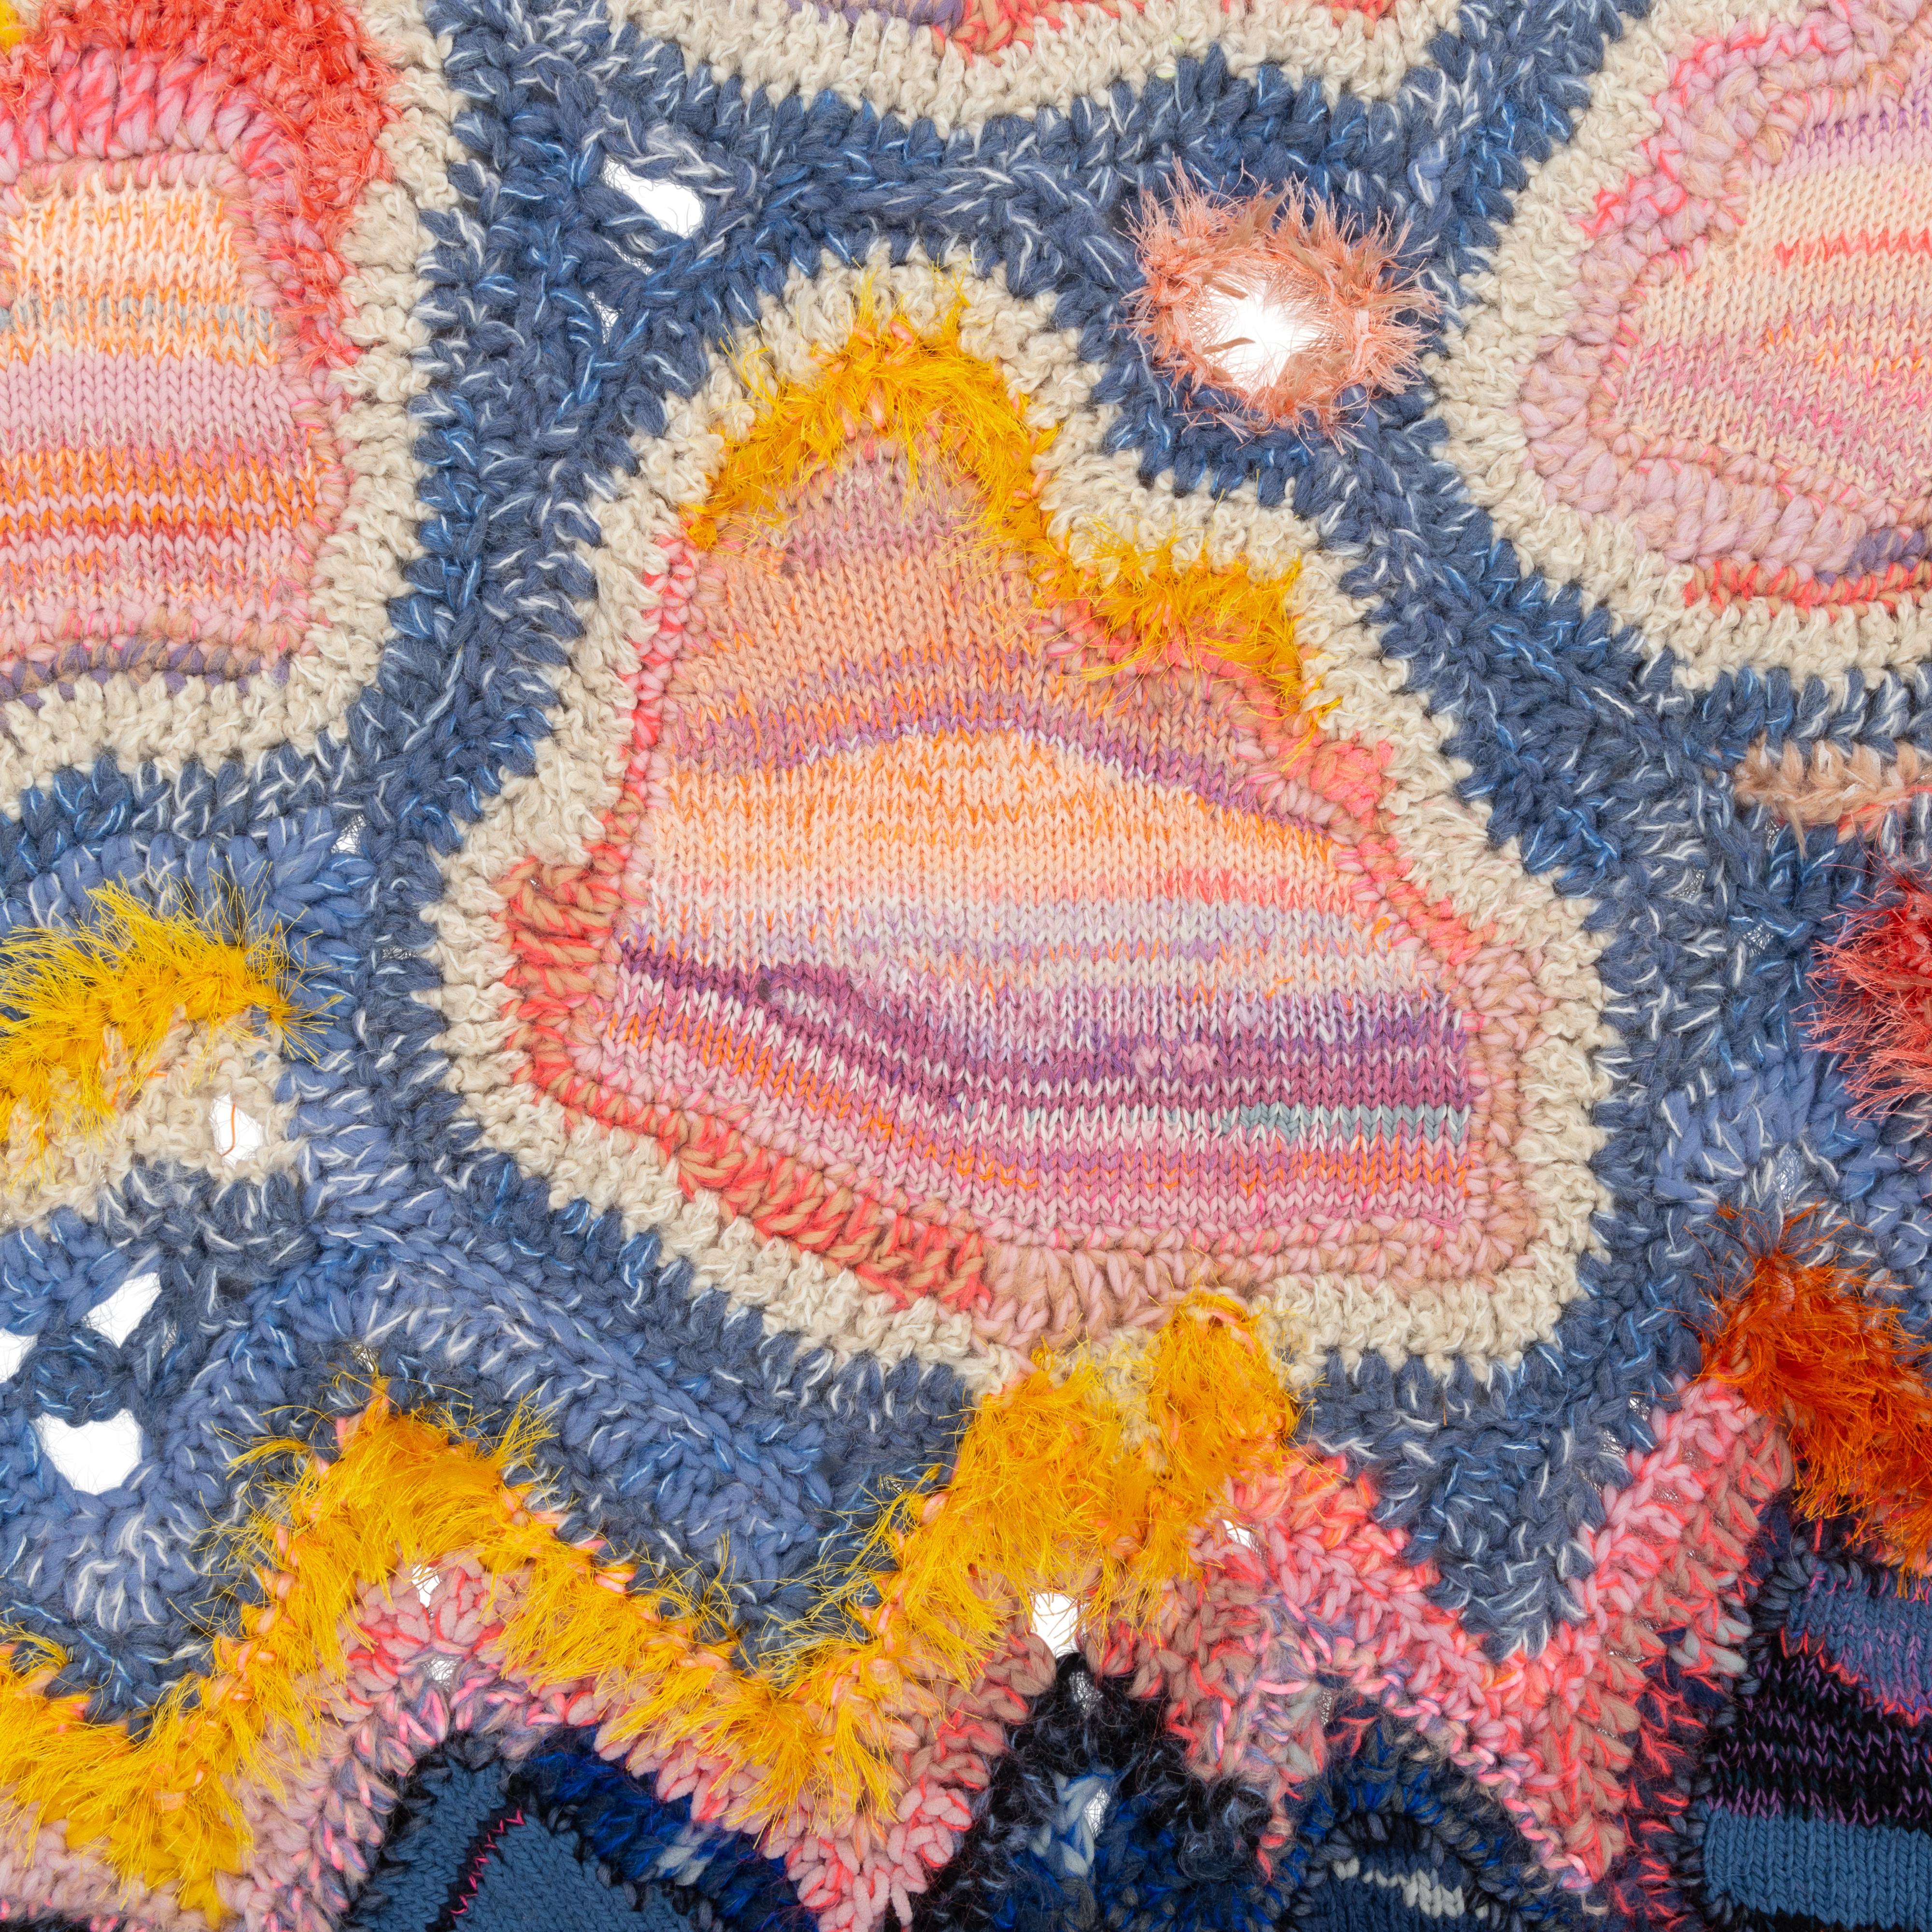 Sunny Sky Handcrafted Knit/Crochet multicoloured Sky Landscape Wallhanging

Textile Art, Hand-crafted, Knit and Crochet Art Blanket, Knitted Tapestry, Wall hanging, Affordable Art.
Sky with fluffy clouds and sun above a geometric landscape